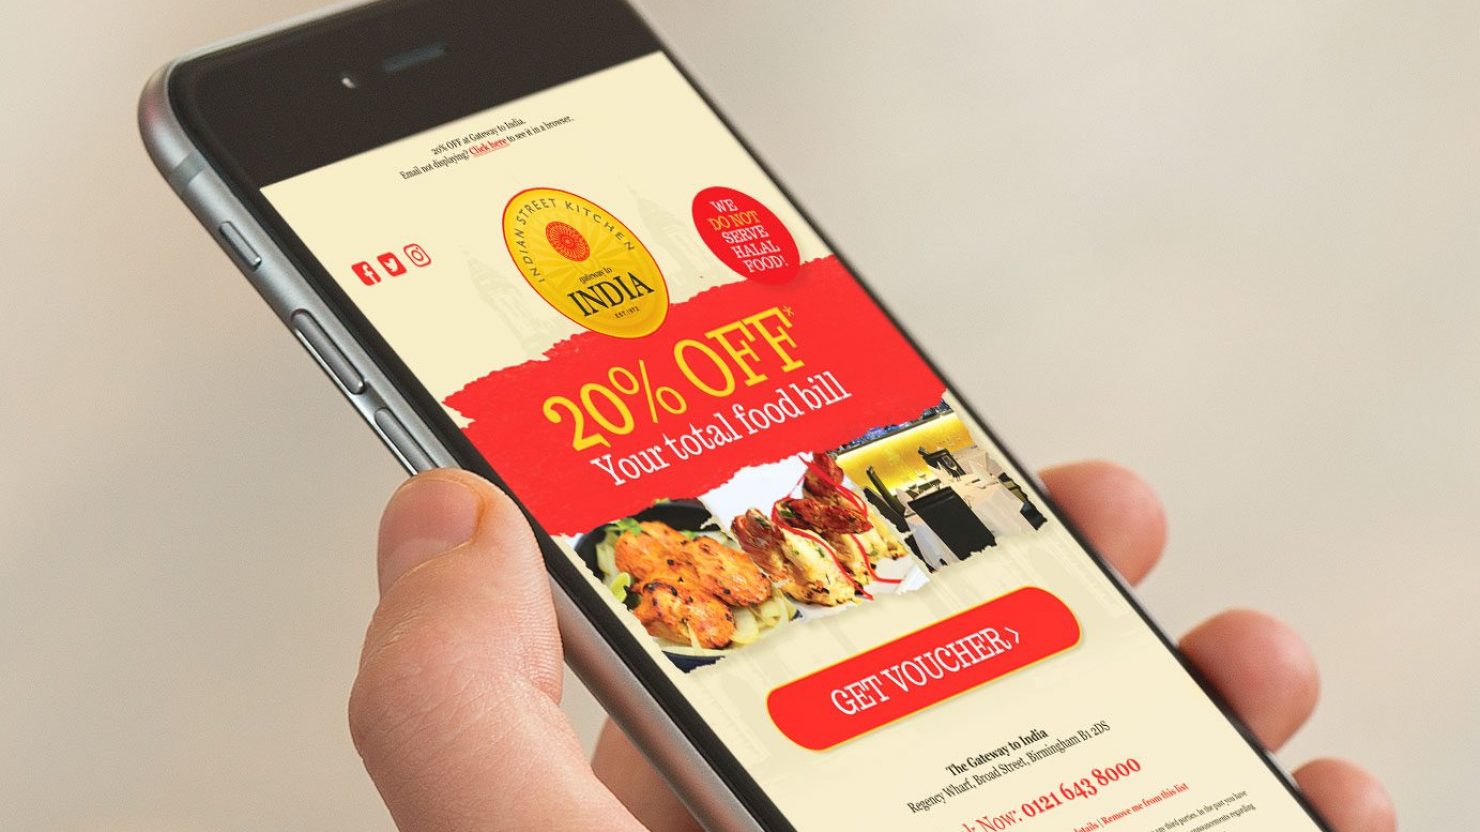 responsive restaurant email marketing for gateway to india shown on iphone